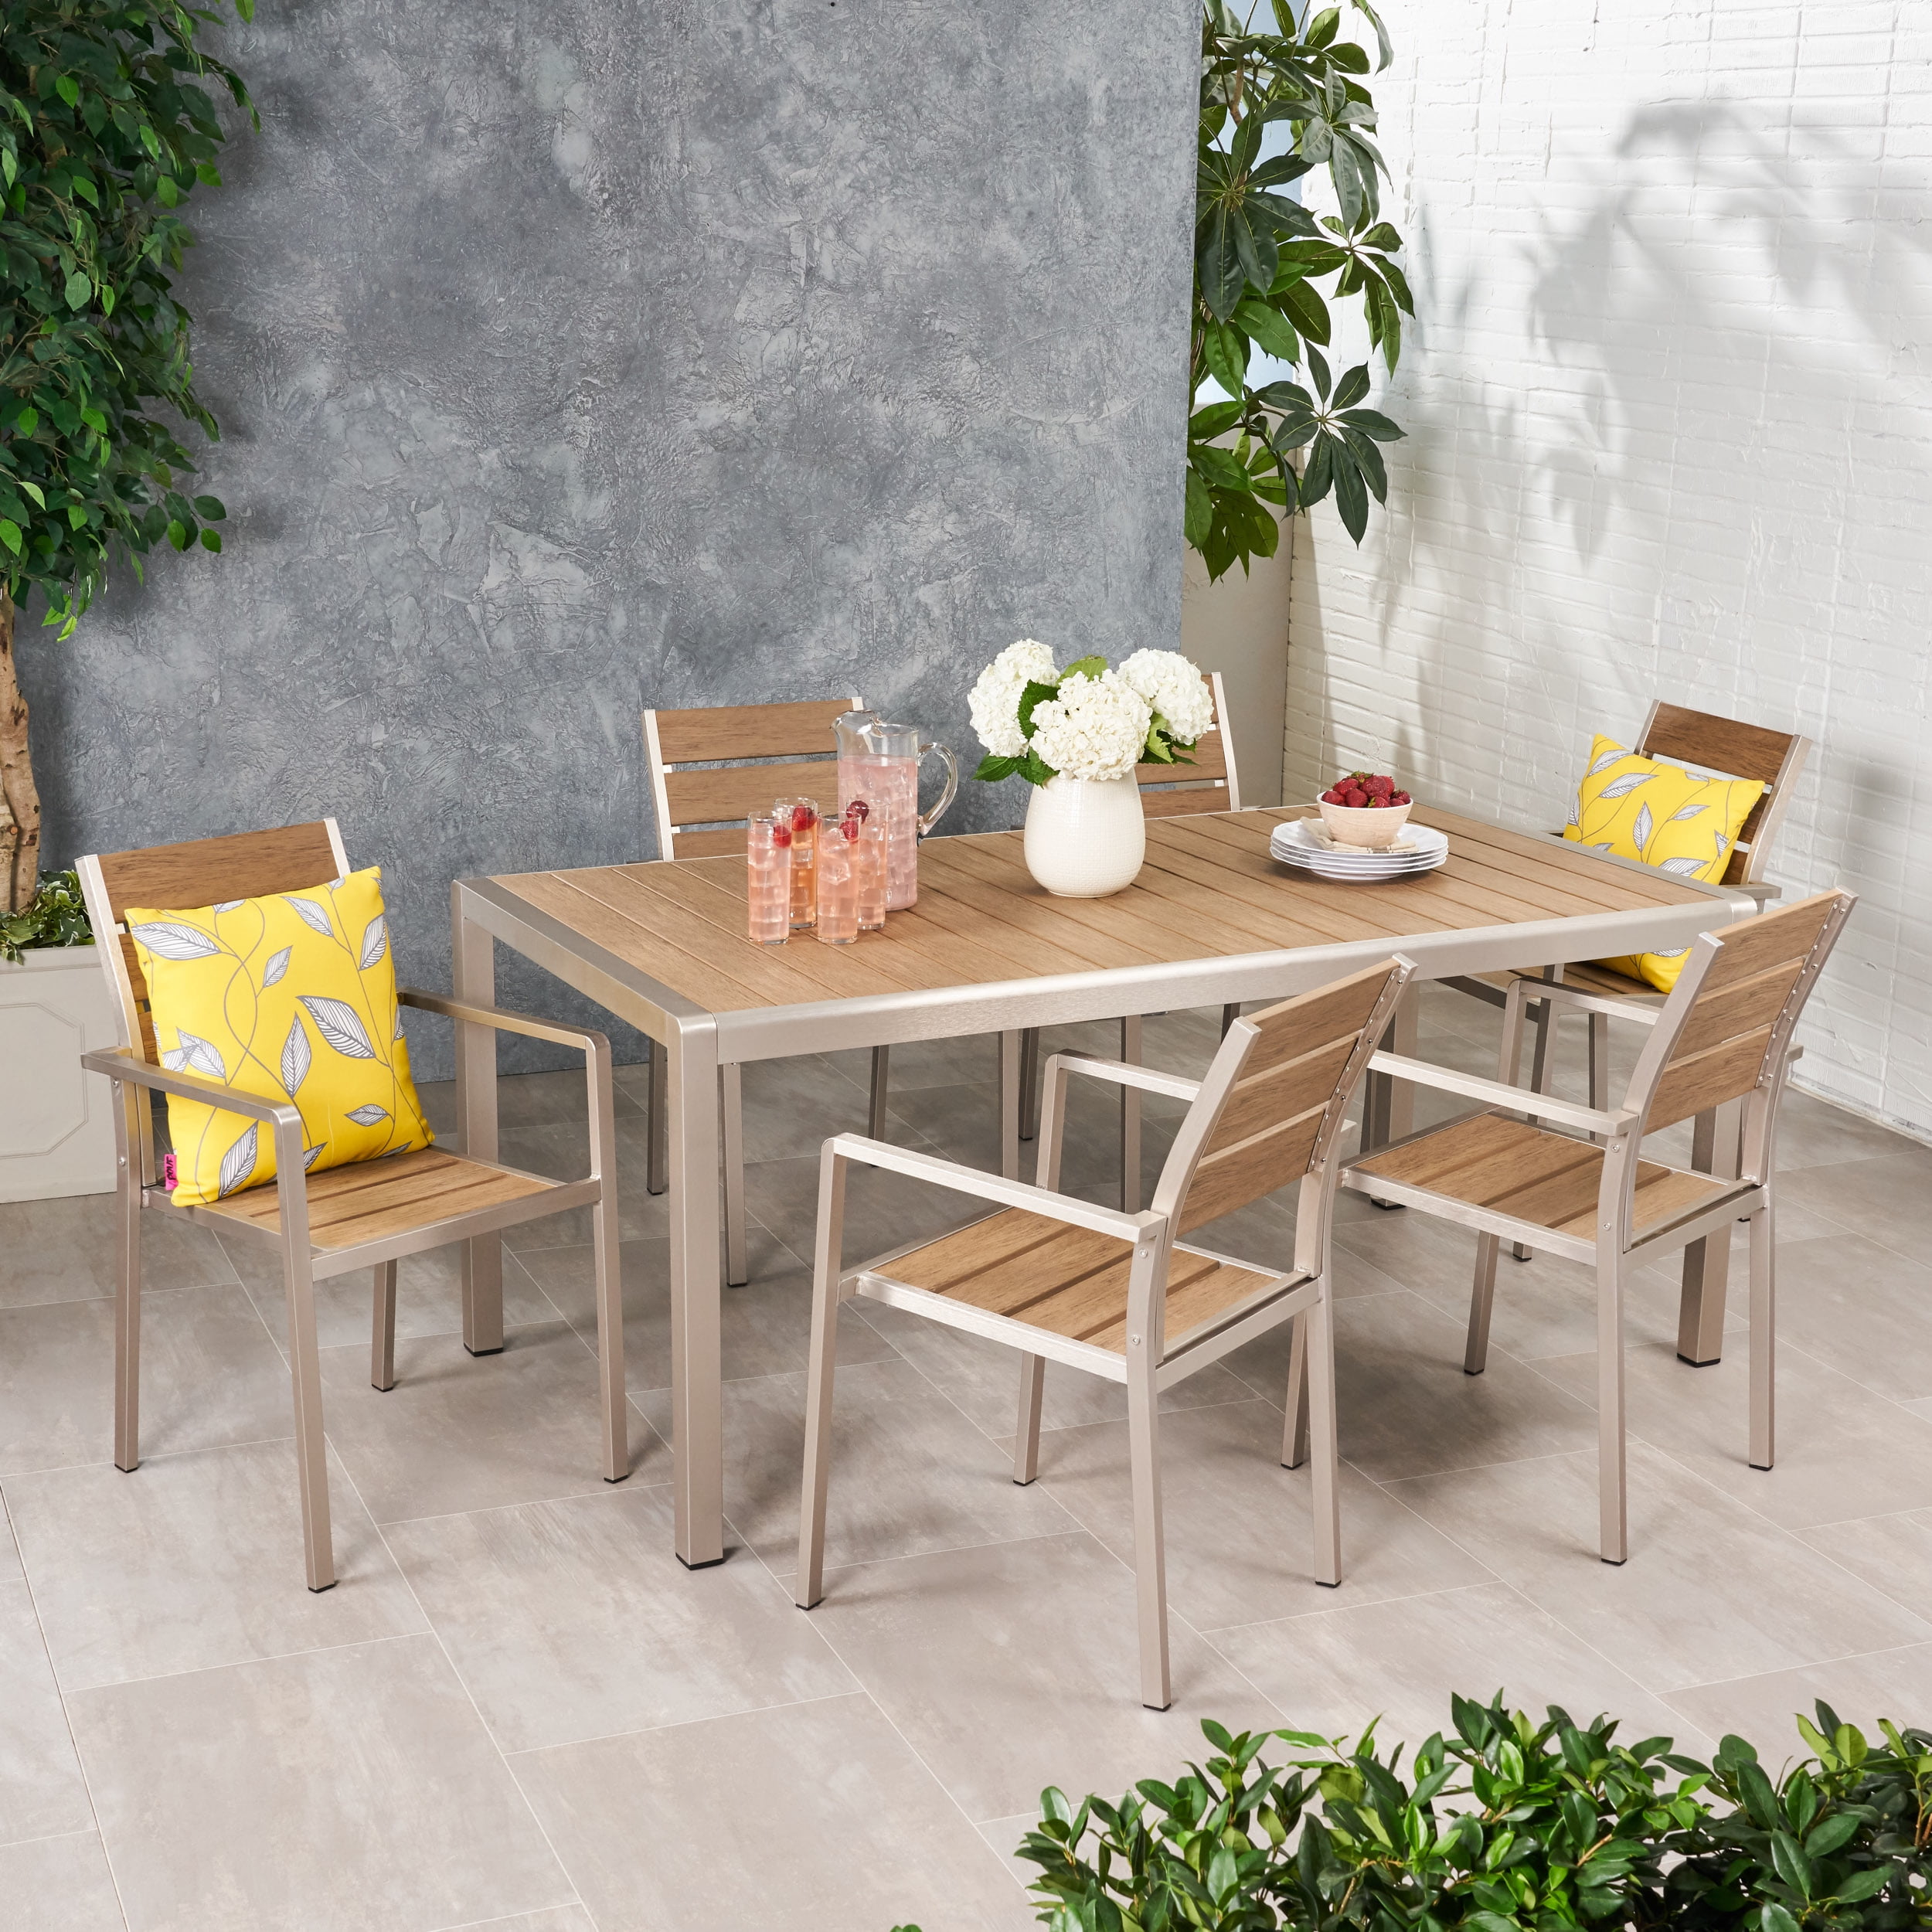 Gannon Outdoor Modern 6 Seater Aluminum and Faux Wood Dining Set